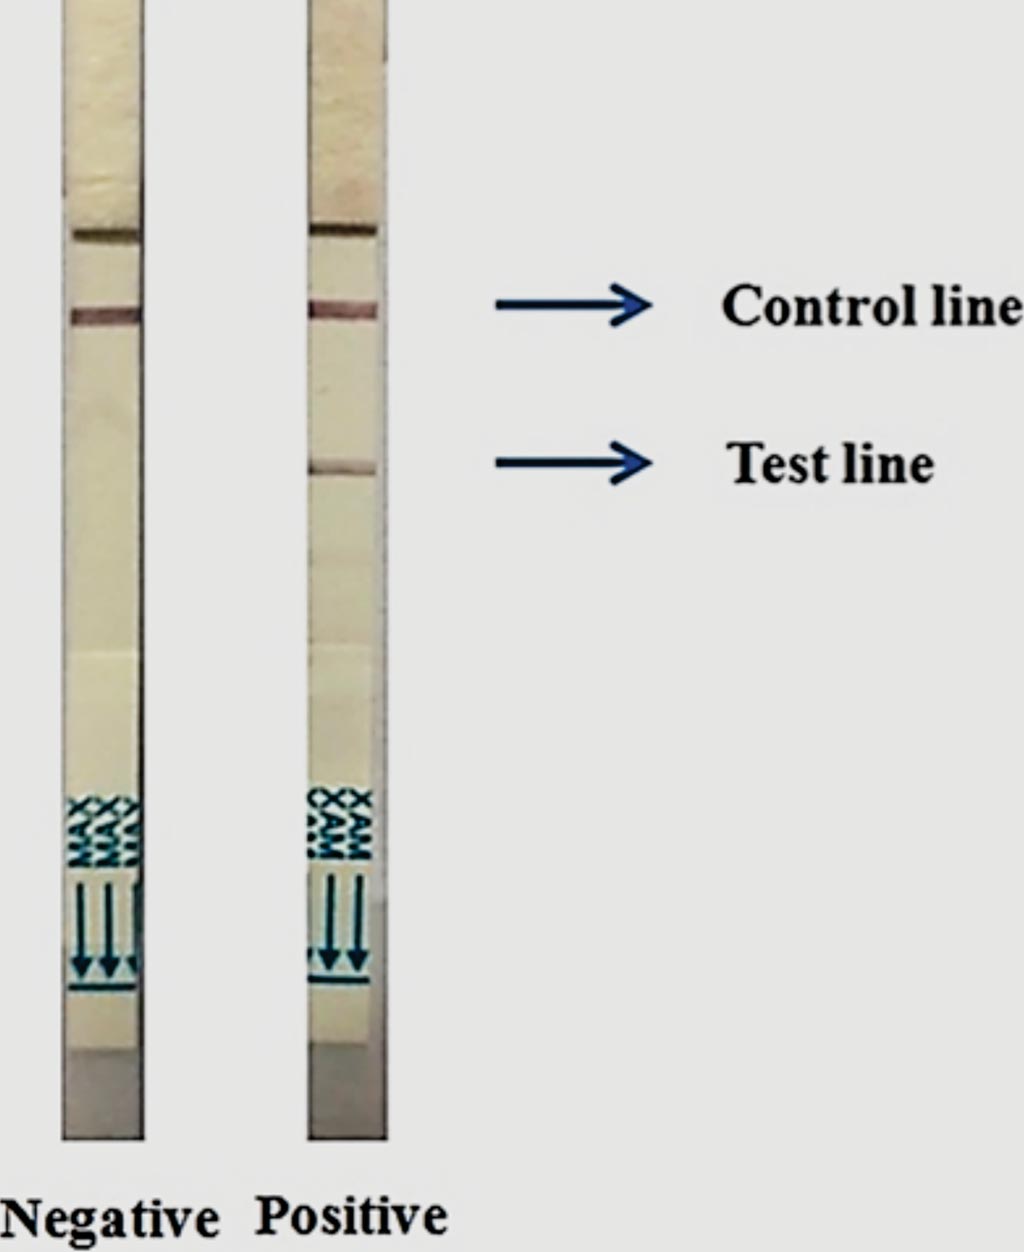 Image: Two Cholkit dipsticks showing characteristic negative (left image) and positive (right image) results after 15 minutes sample run (Photo courtesy of International Centre for Diarrhoeal Disease Research).